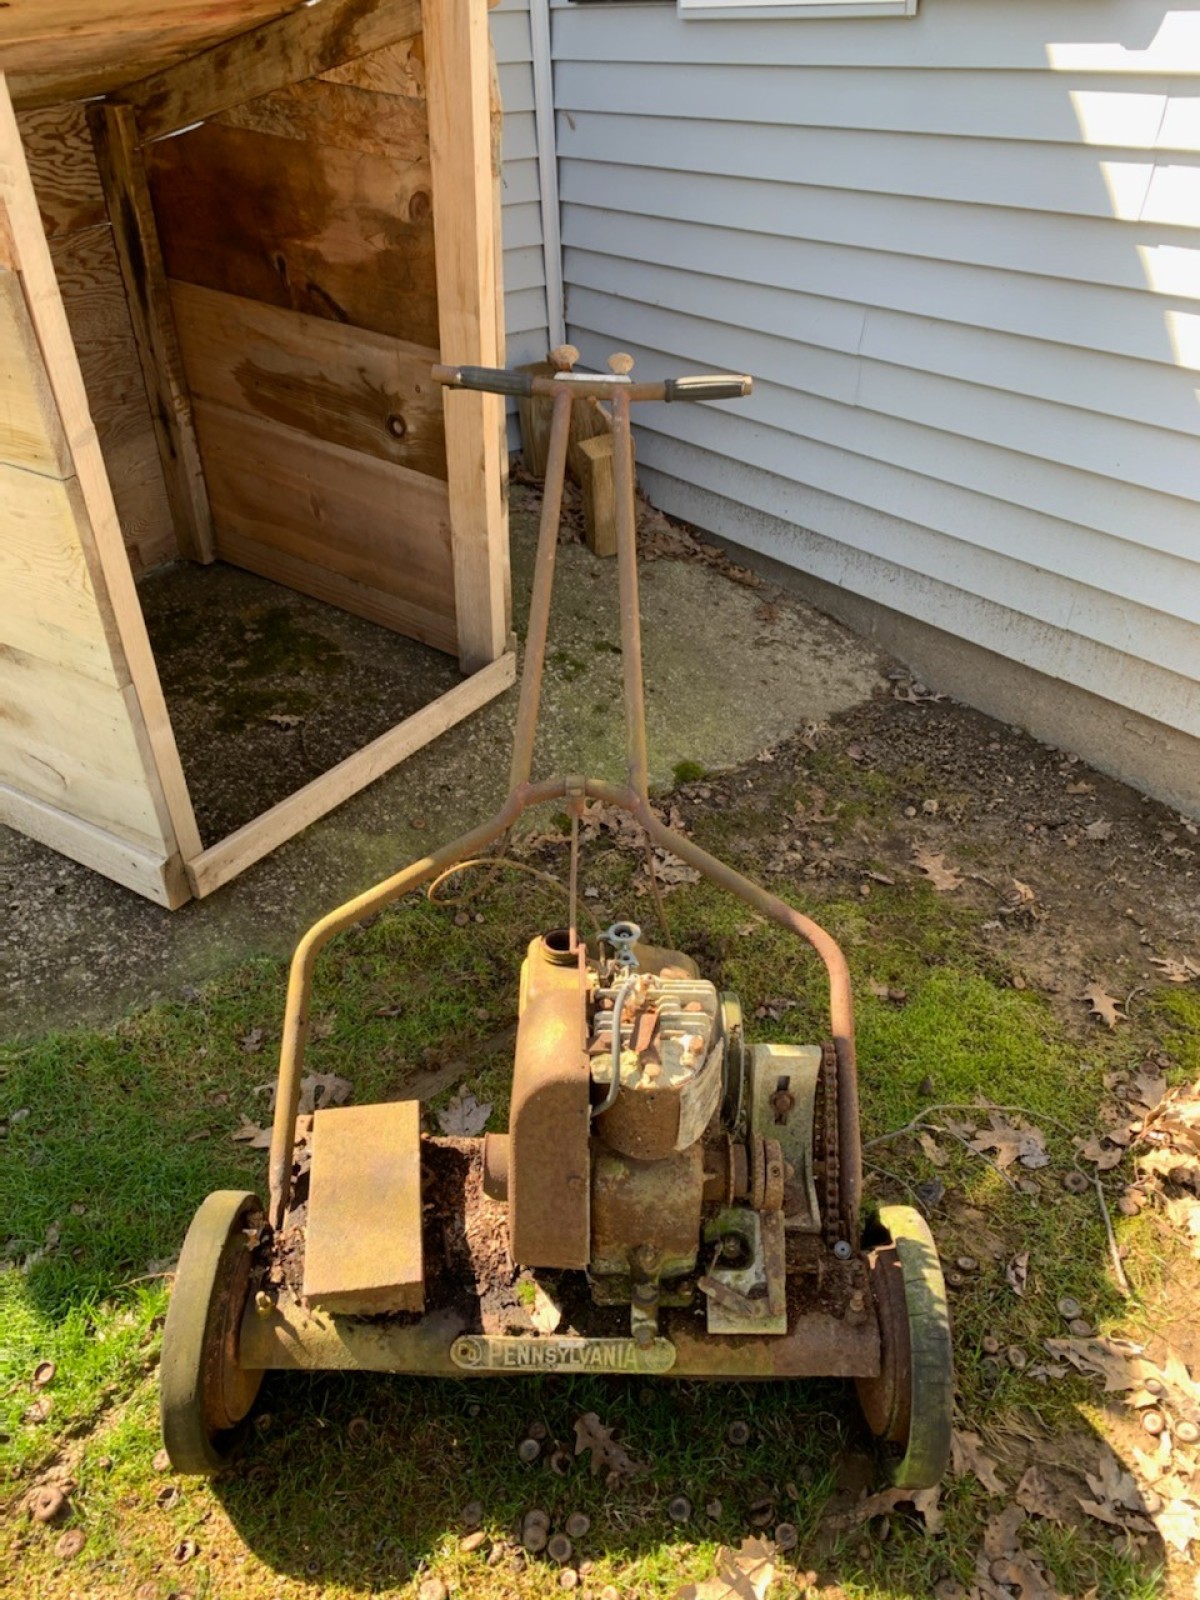 Vintage gas reel as a daily mower?